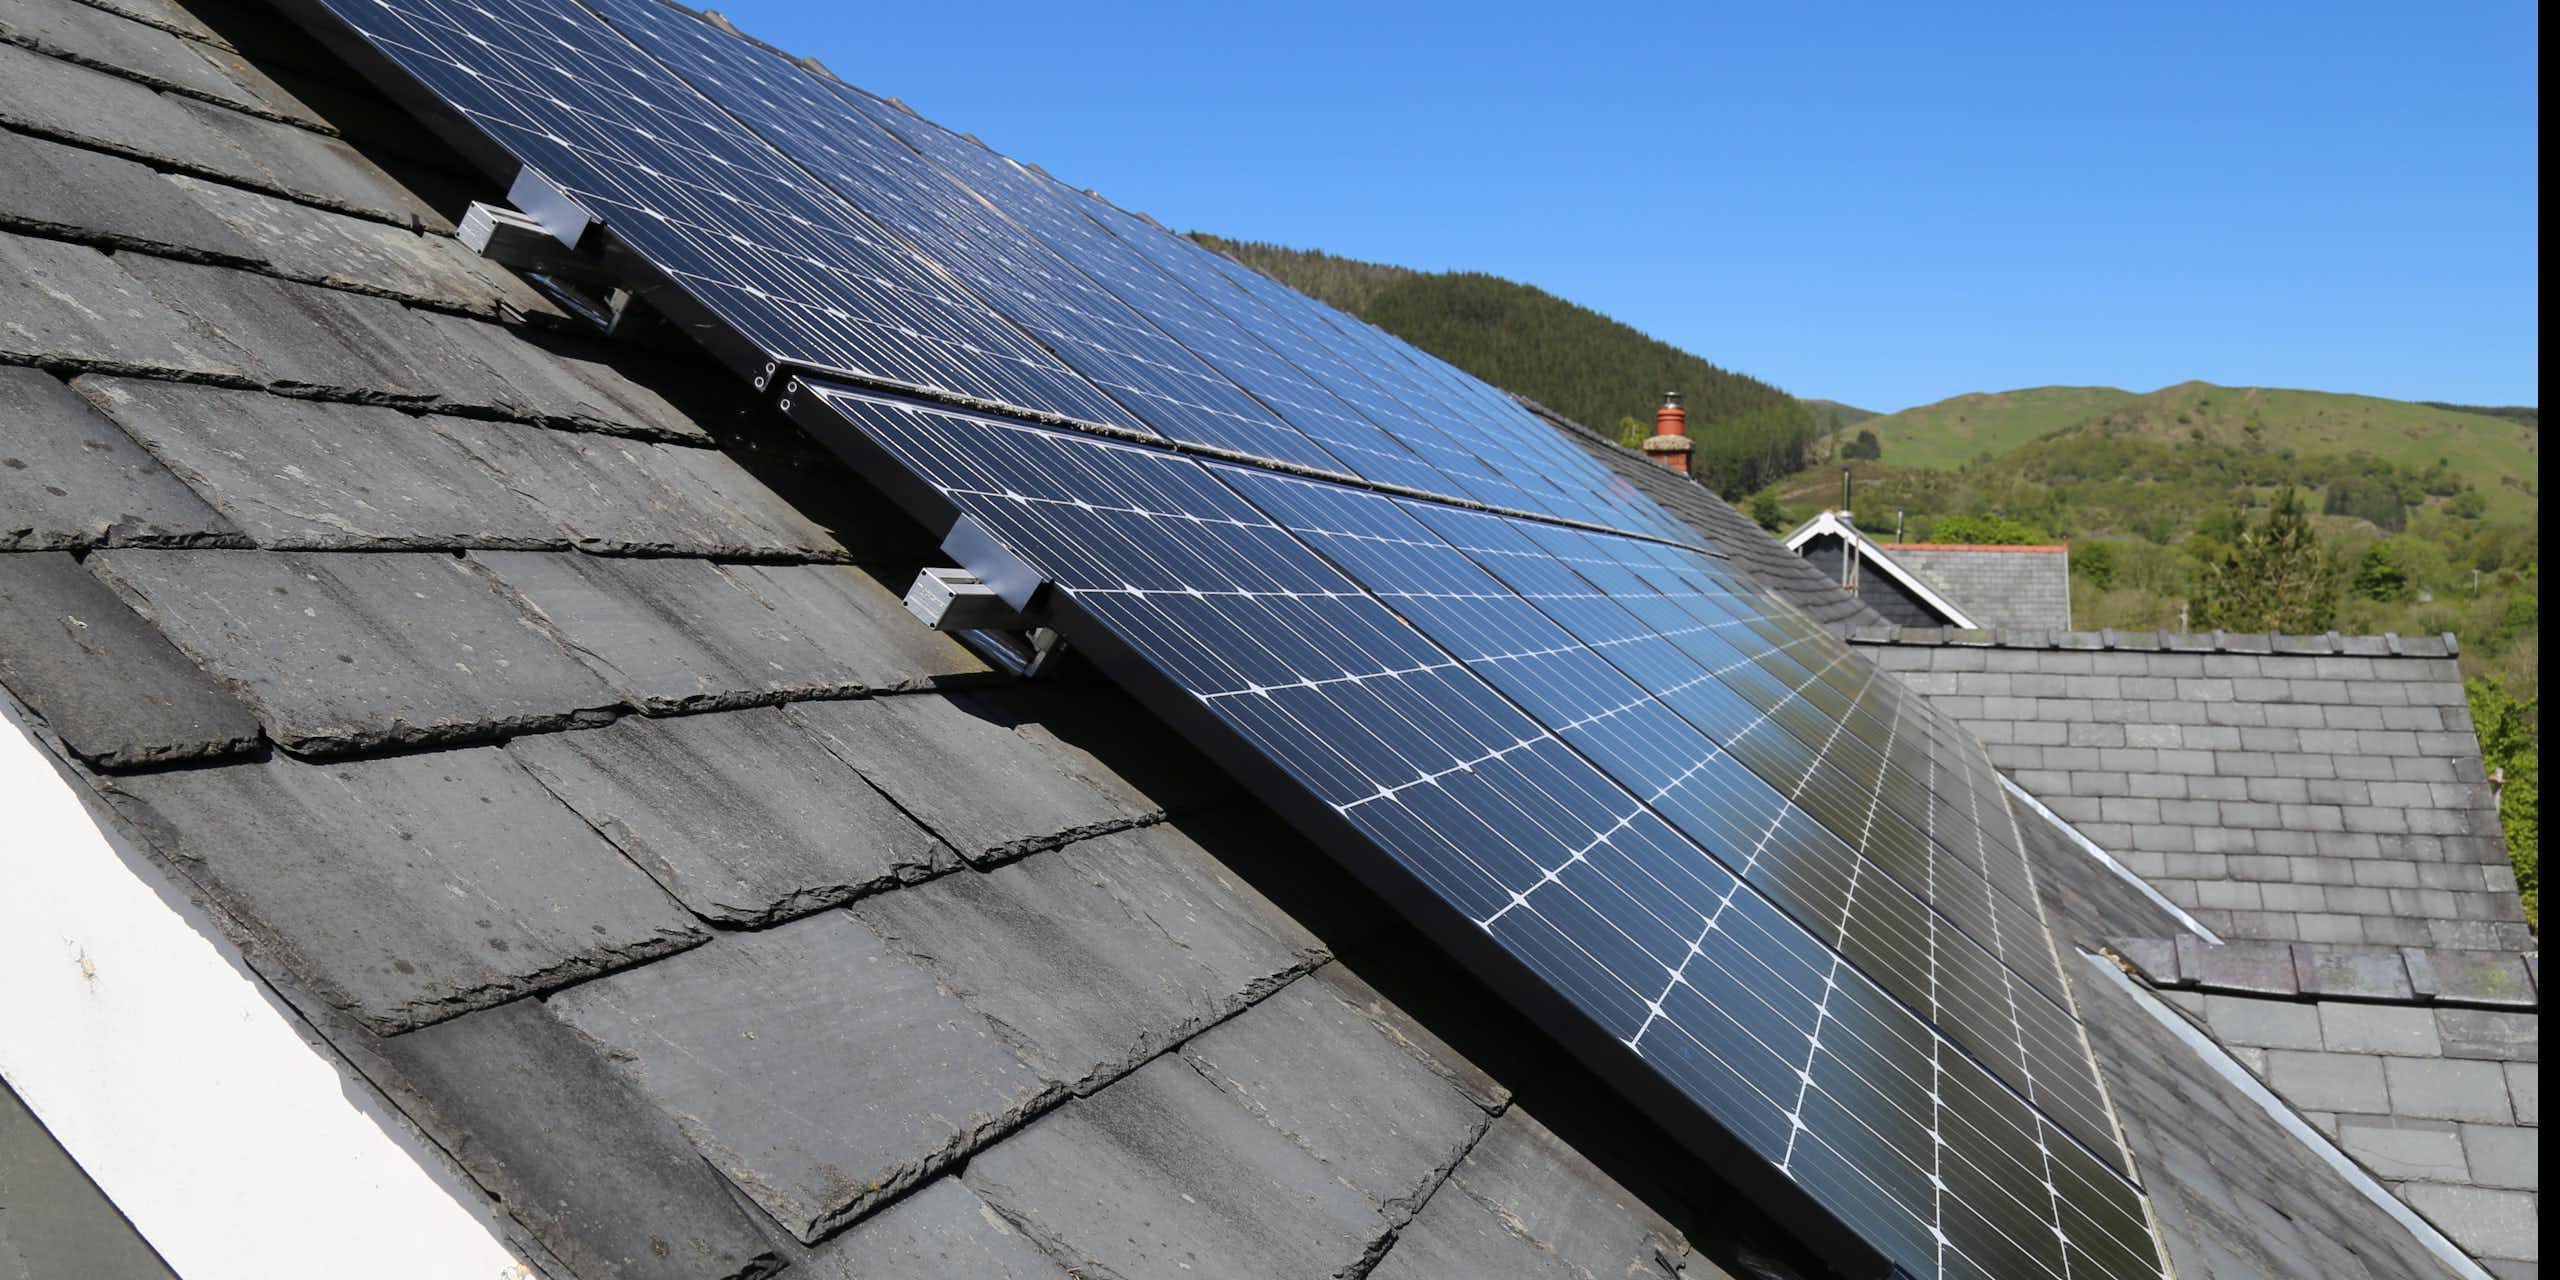 Rooftop renewables risk making the rich richer, as latecomers will struggle to access the grid